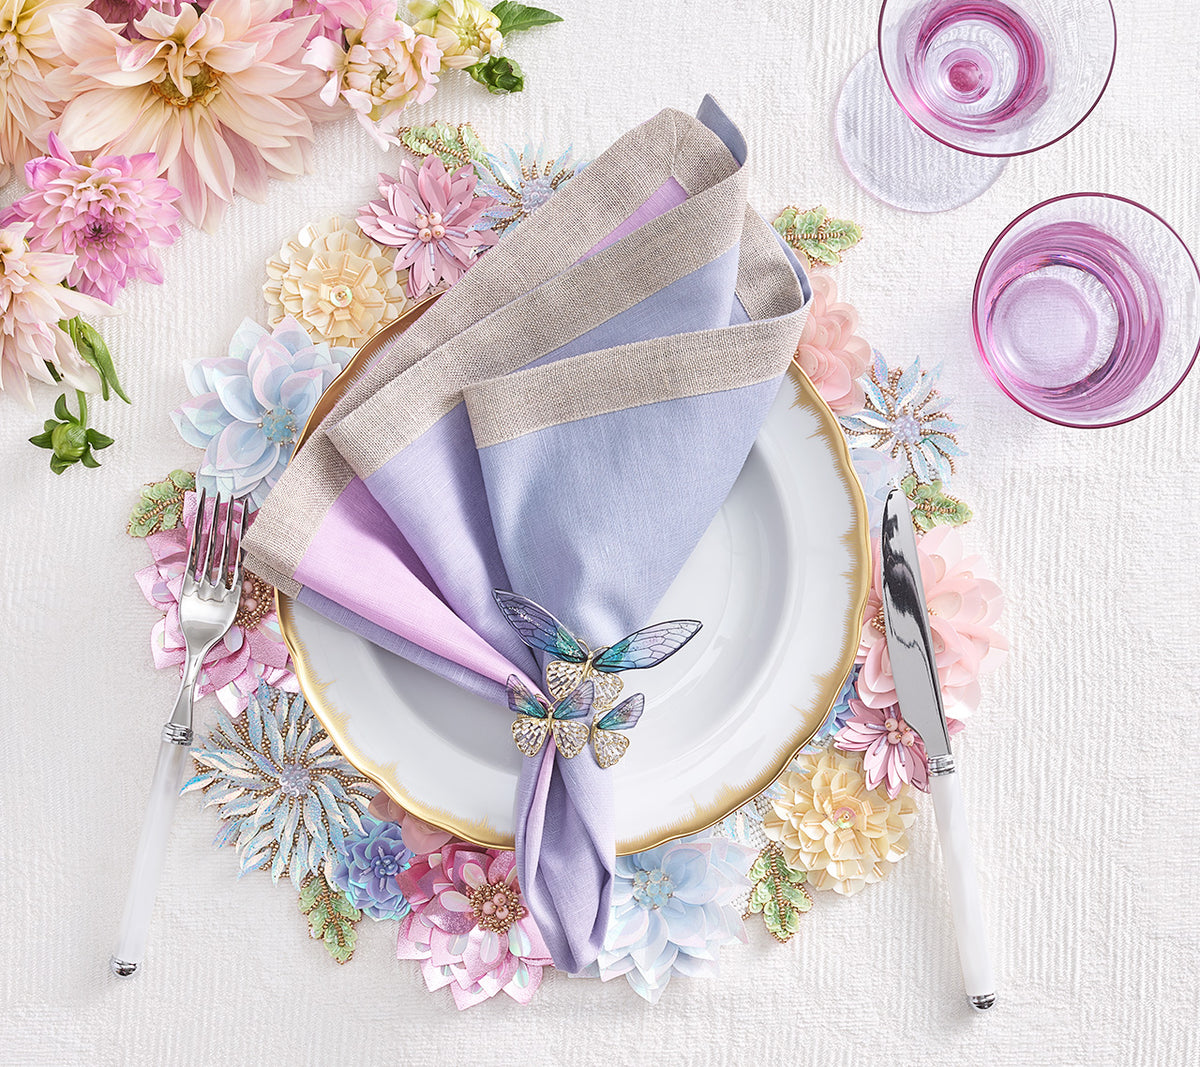 Flutter Napkin Ring holding pastel linen napkins on a table with floral decor